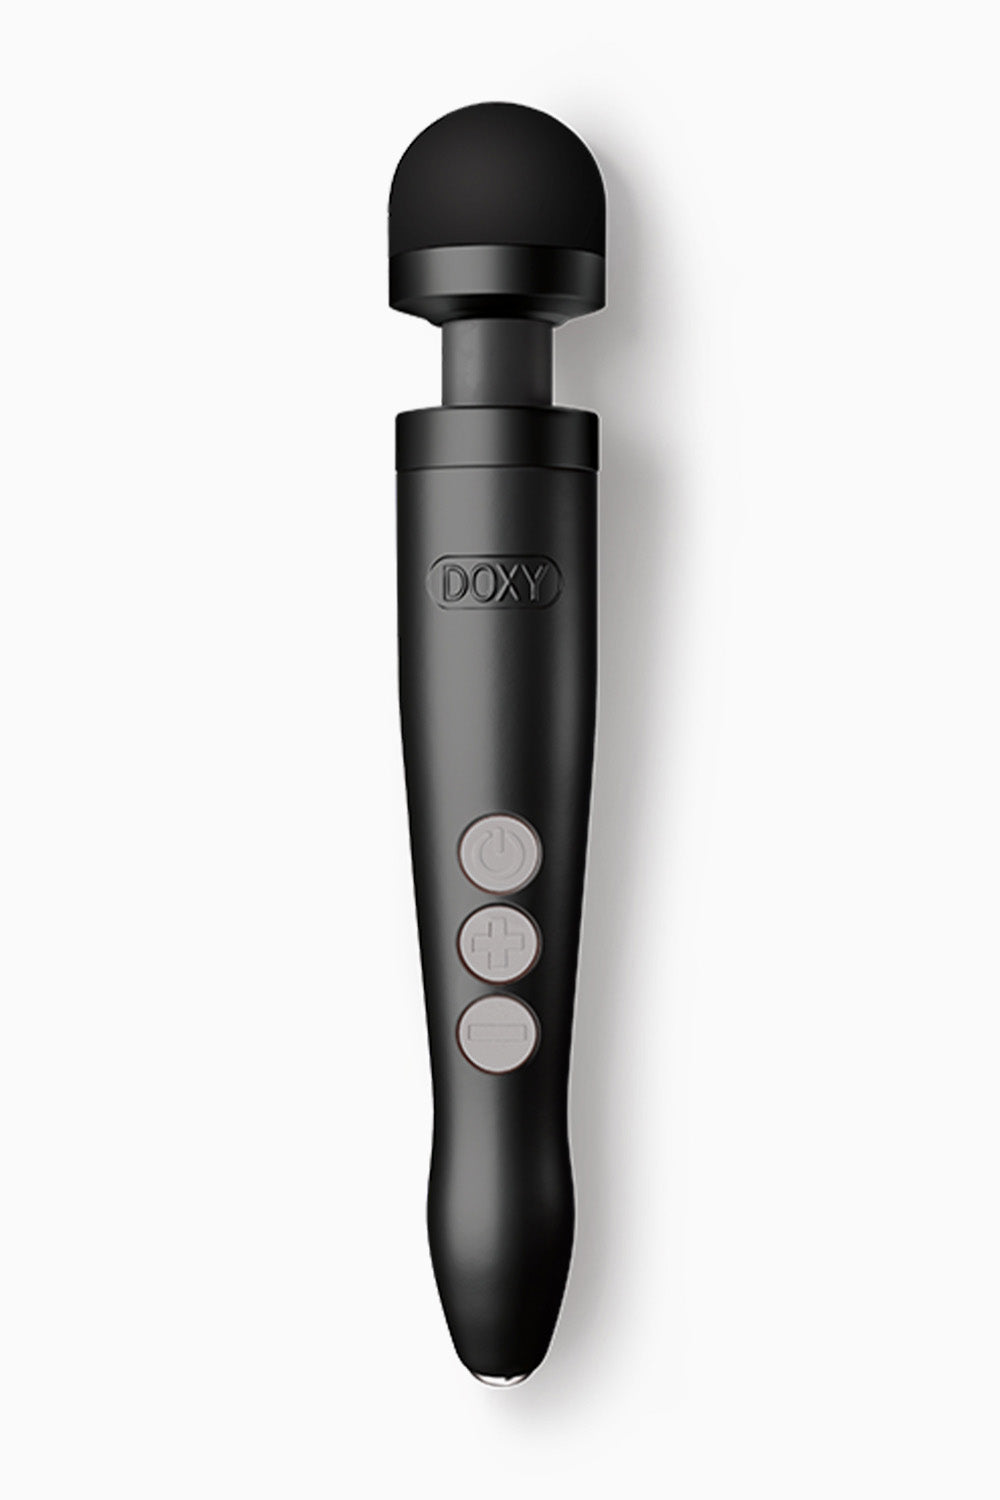 Doxy Die Cast 3 Rechargeable Massage Wand Vibrator Black